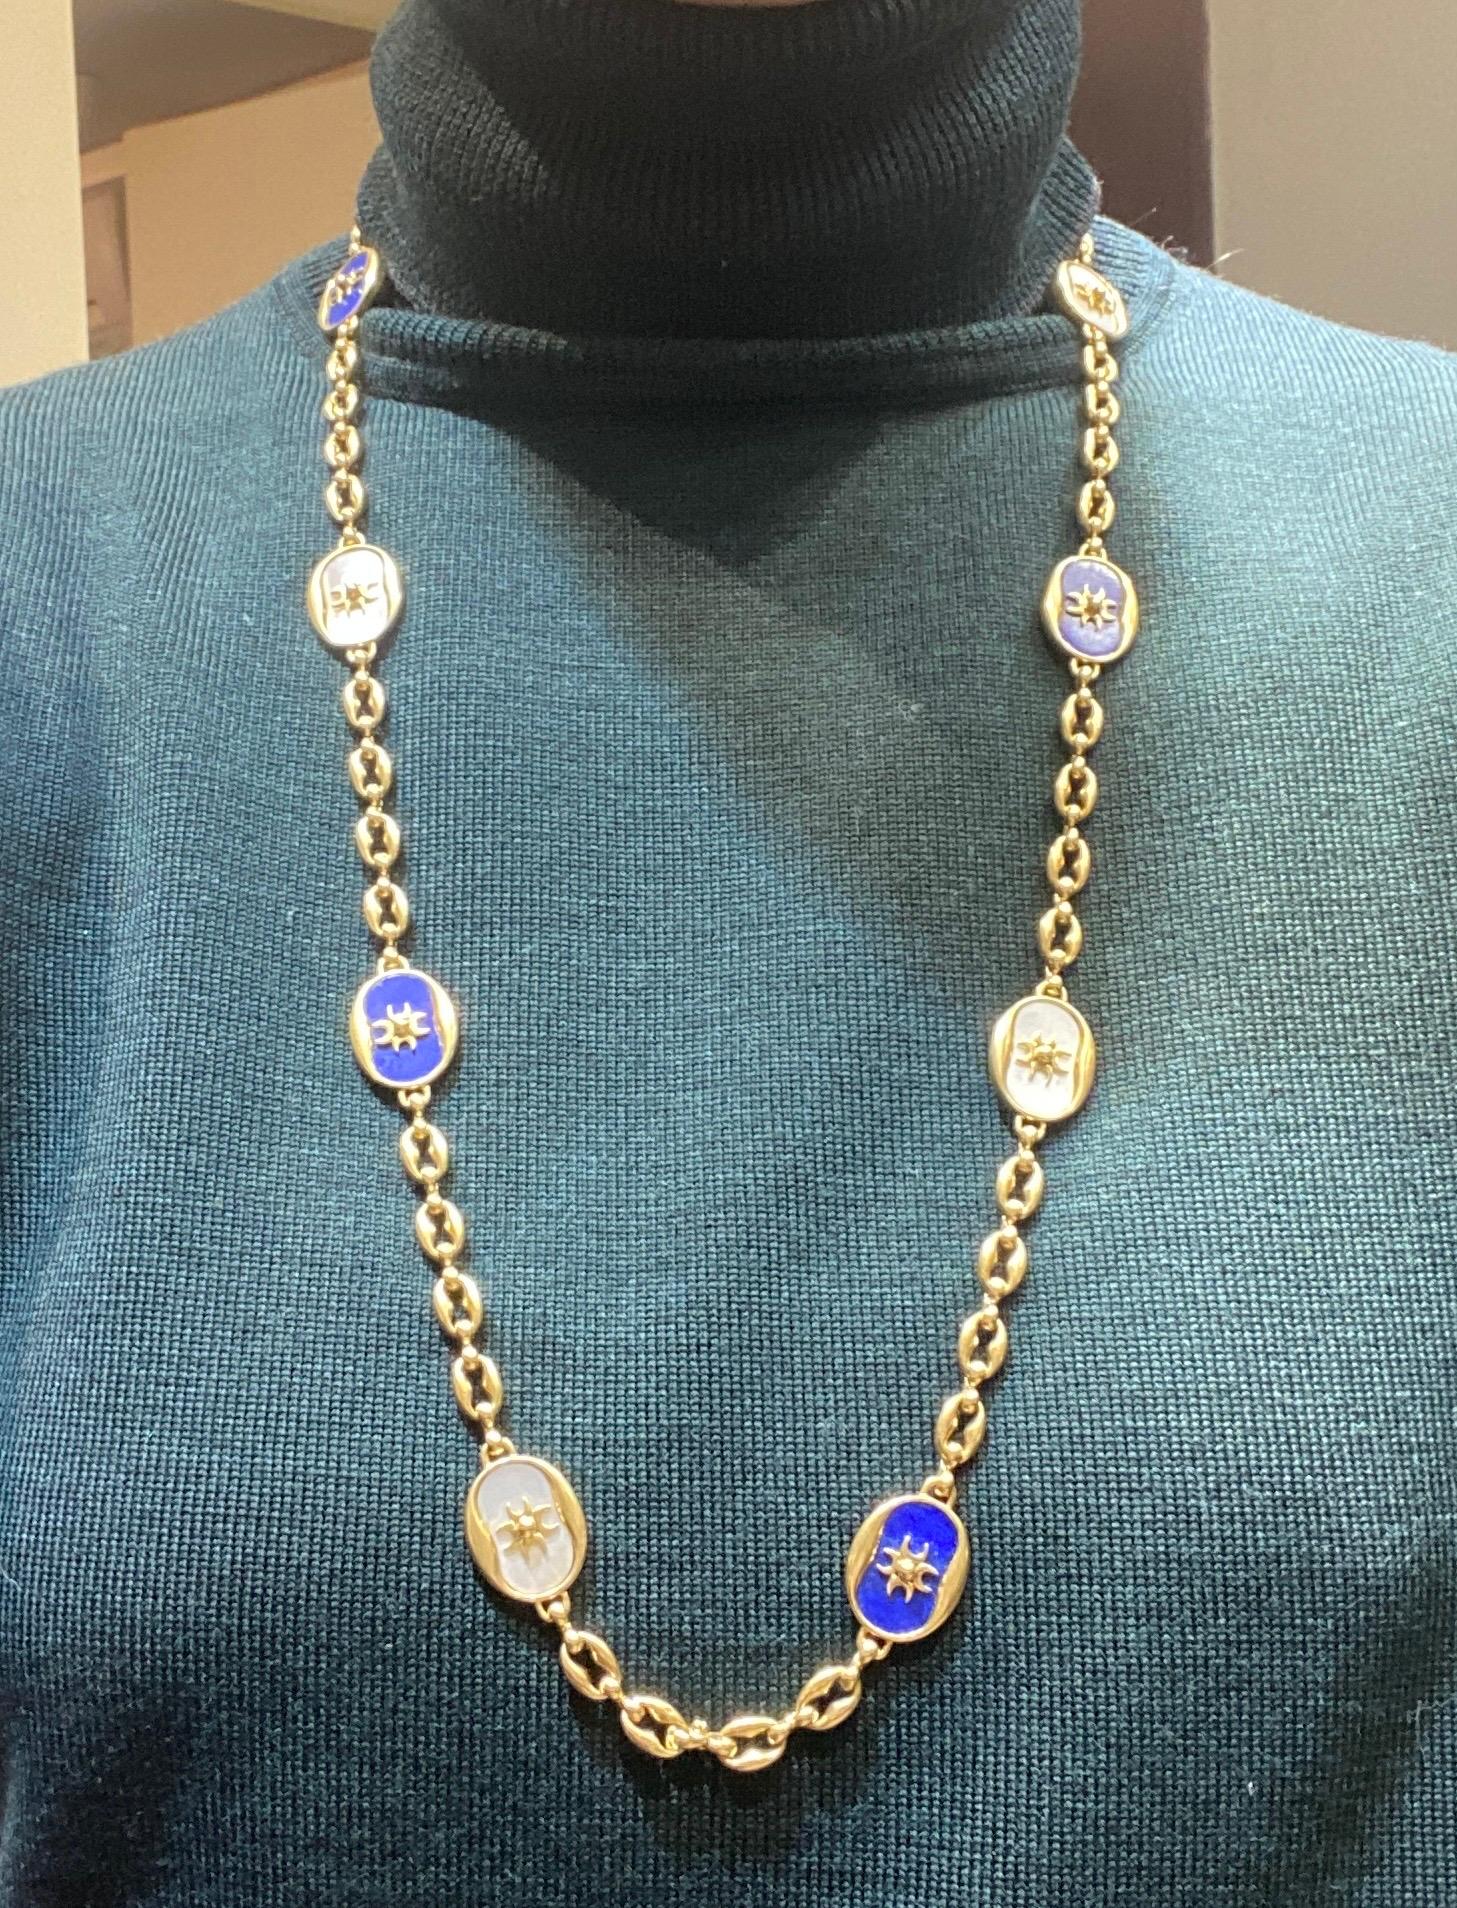 This is a rare necklace made by Jean-Jacques Cartier, the illustrious head of the London branch of the iconic Cartier brand. The chain is marked with the distinctive insignia of Jean-Jacques Cartier himself.

This 18k gold chain is interspersed with